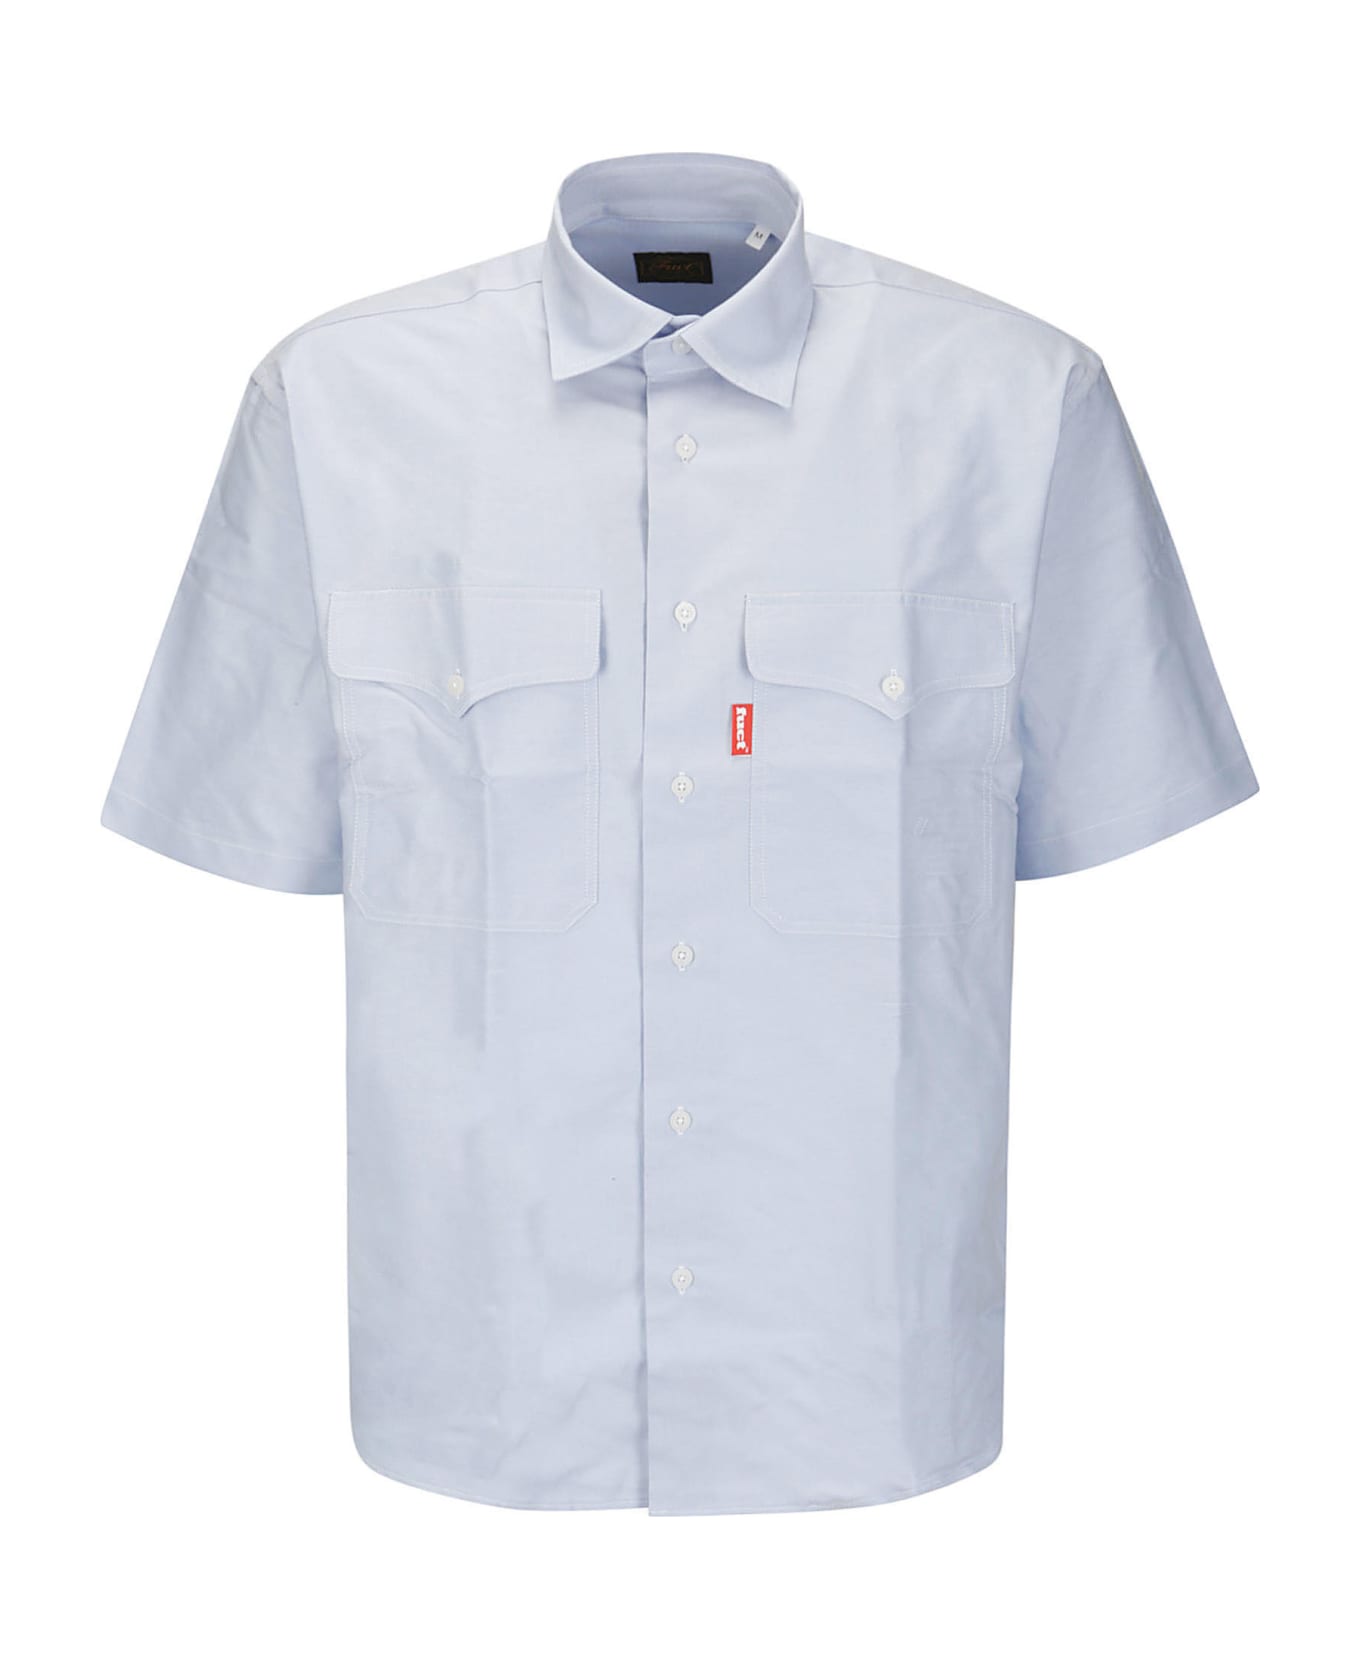 Fuct Ss Workwear Shirt - COUNTRY AIR シャツ